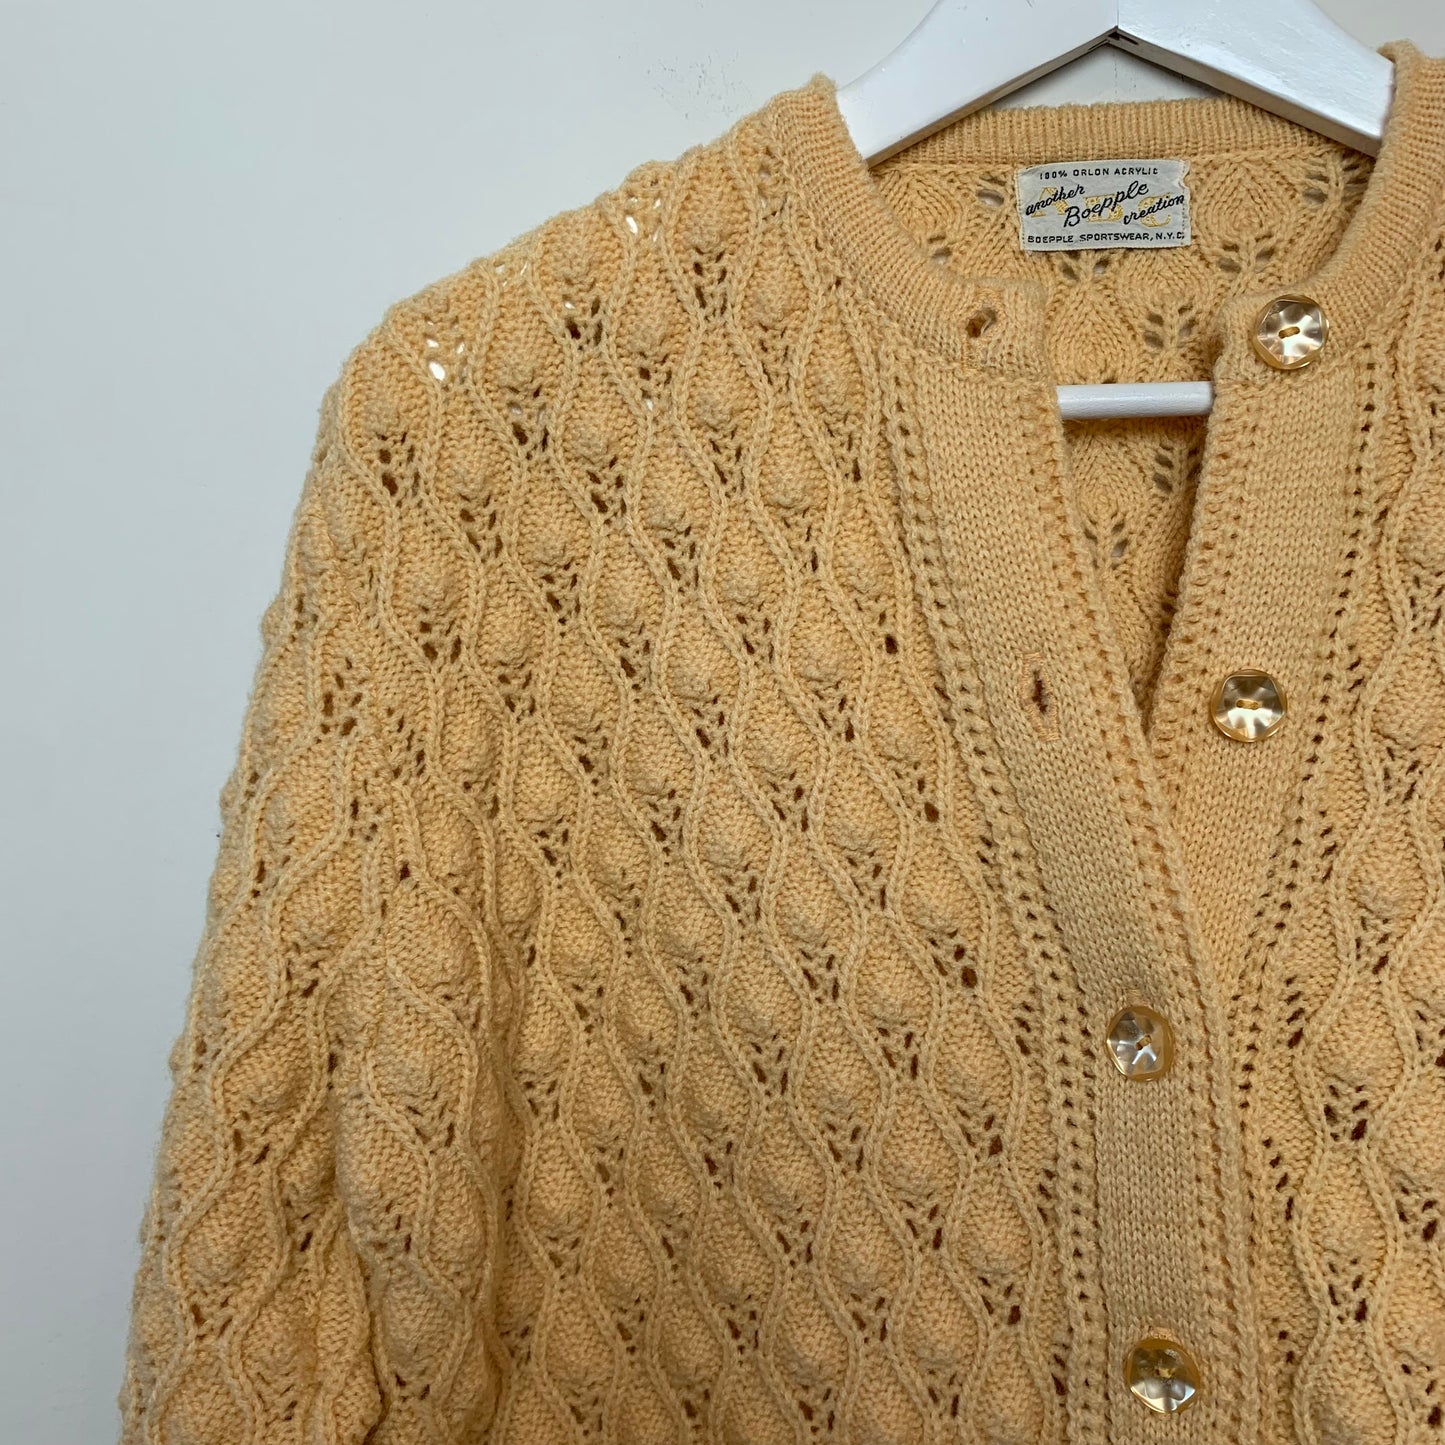 Vintage 60's Yellow Cardigan Sweater Another Boepple Creation ABC